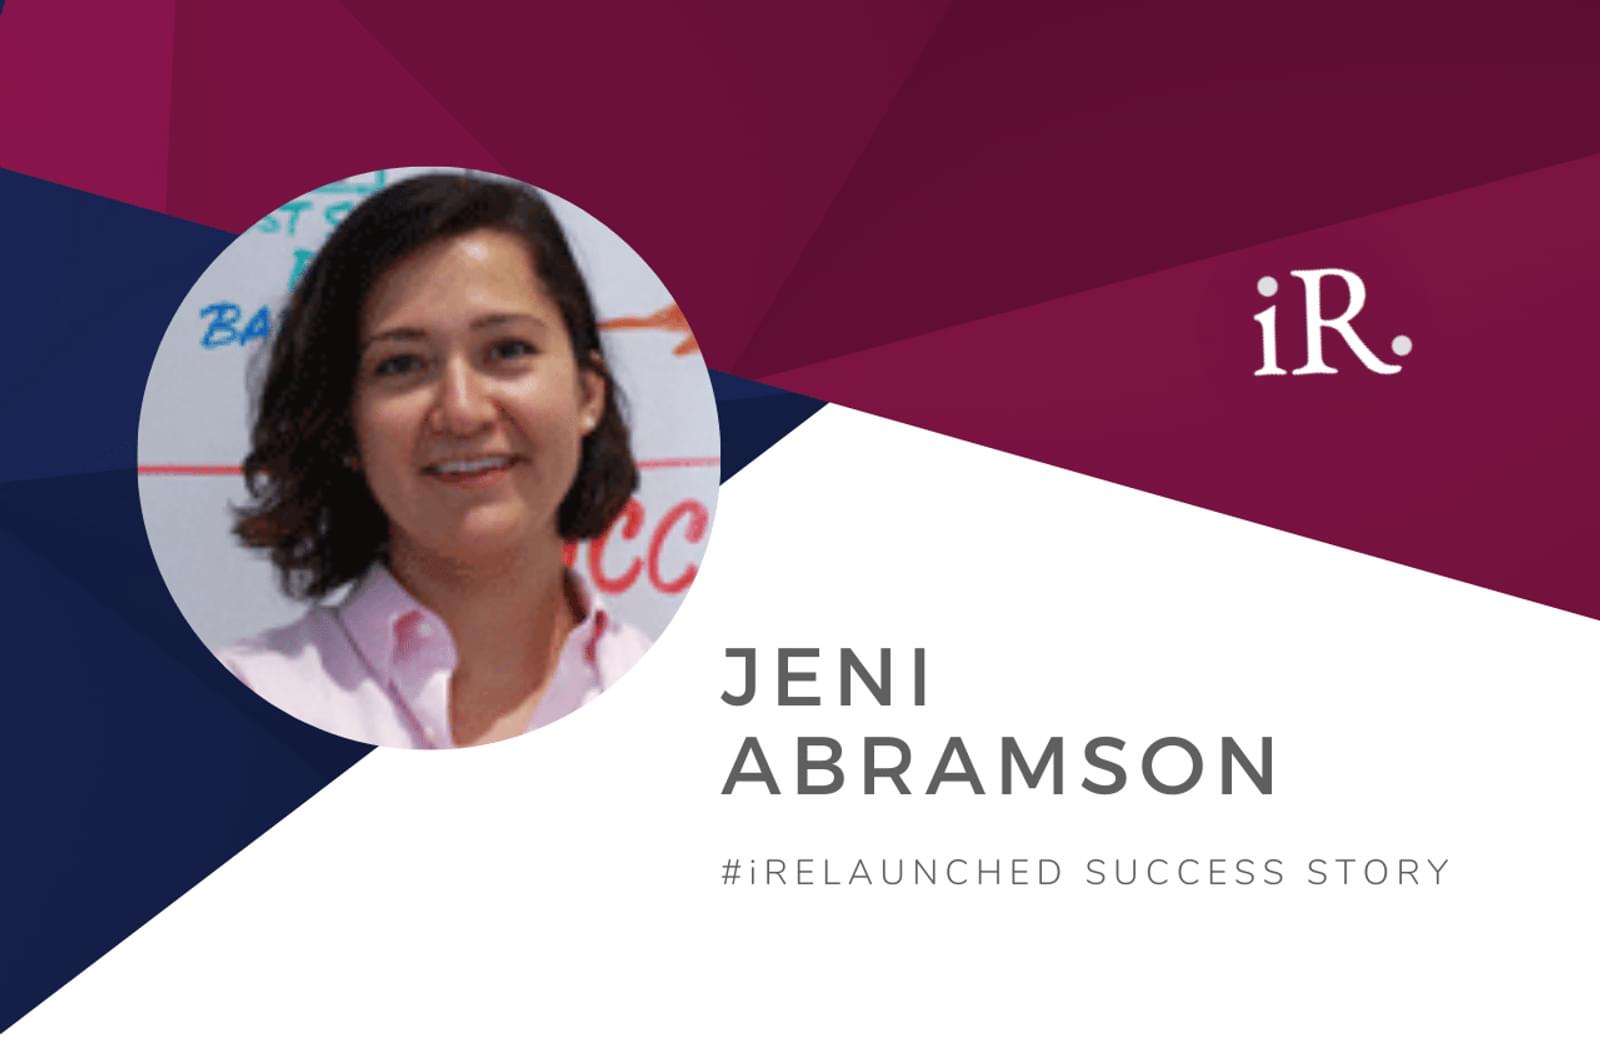 Jeni Abramson's headshot and the text #iRelaunched Success Story along with the iRelaunch logo.  A navy and maroon geometric textured background intersect behind Jeni's headshot.